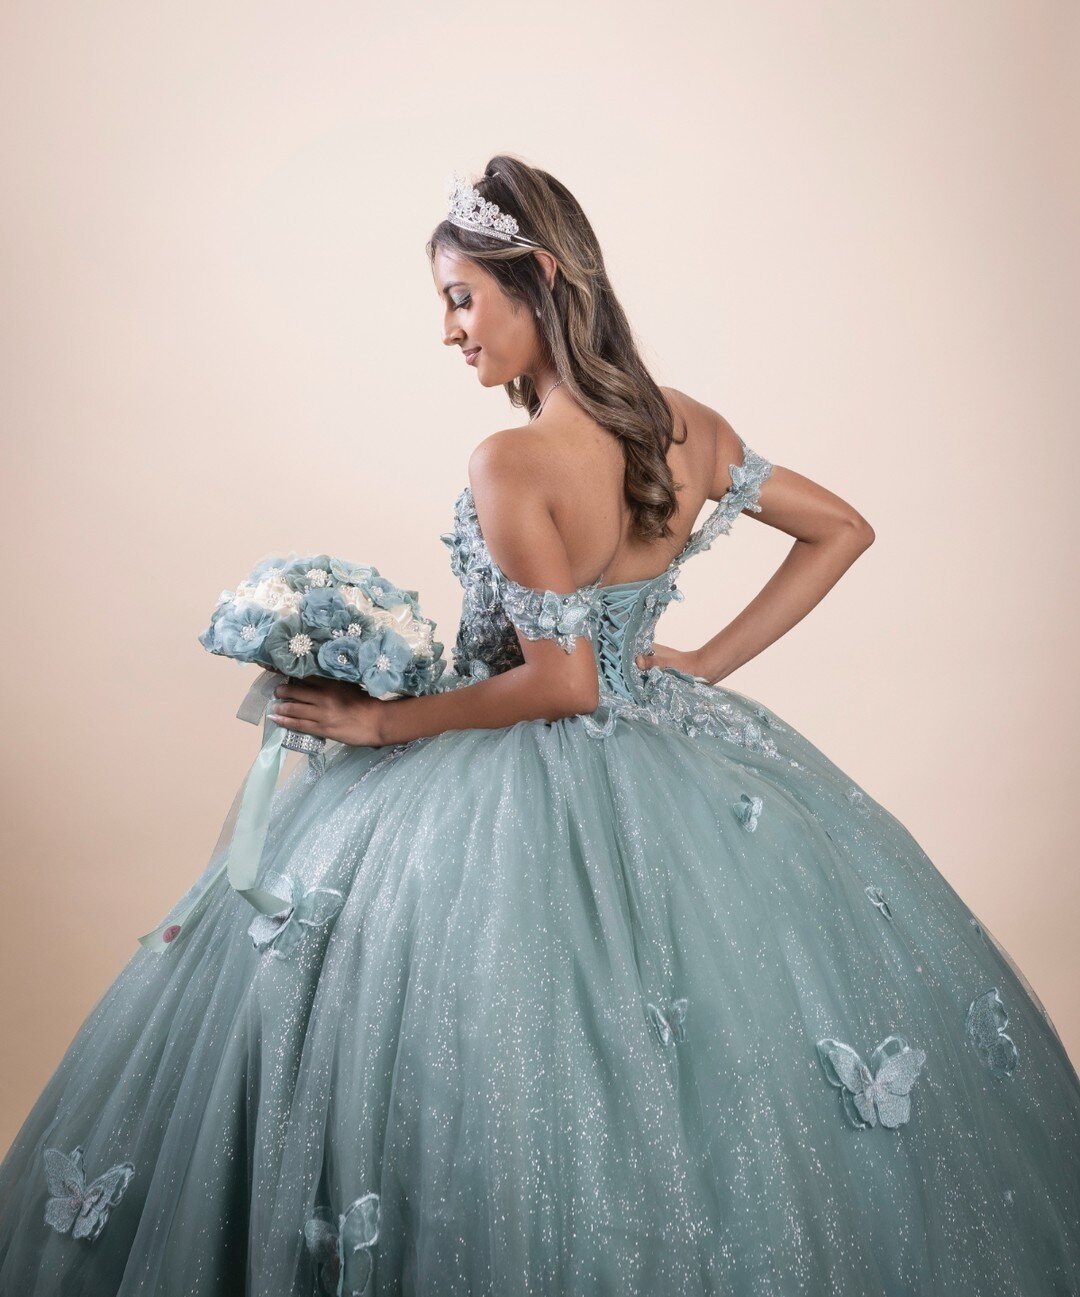 Beautiful Session! 😍 

Are you going to have a Quinceanera Event? Let us Help you!

Visit our Studio from Monday to Friday from 11am to 6pm
Address: 1936 Saviers Rd Oxnard CA 93033
Phone: (805) 487-5154

Hablamos Espanol!

#quincea&ntilde;era #photo